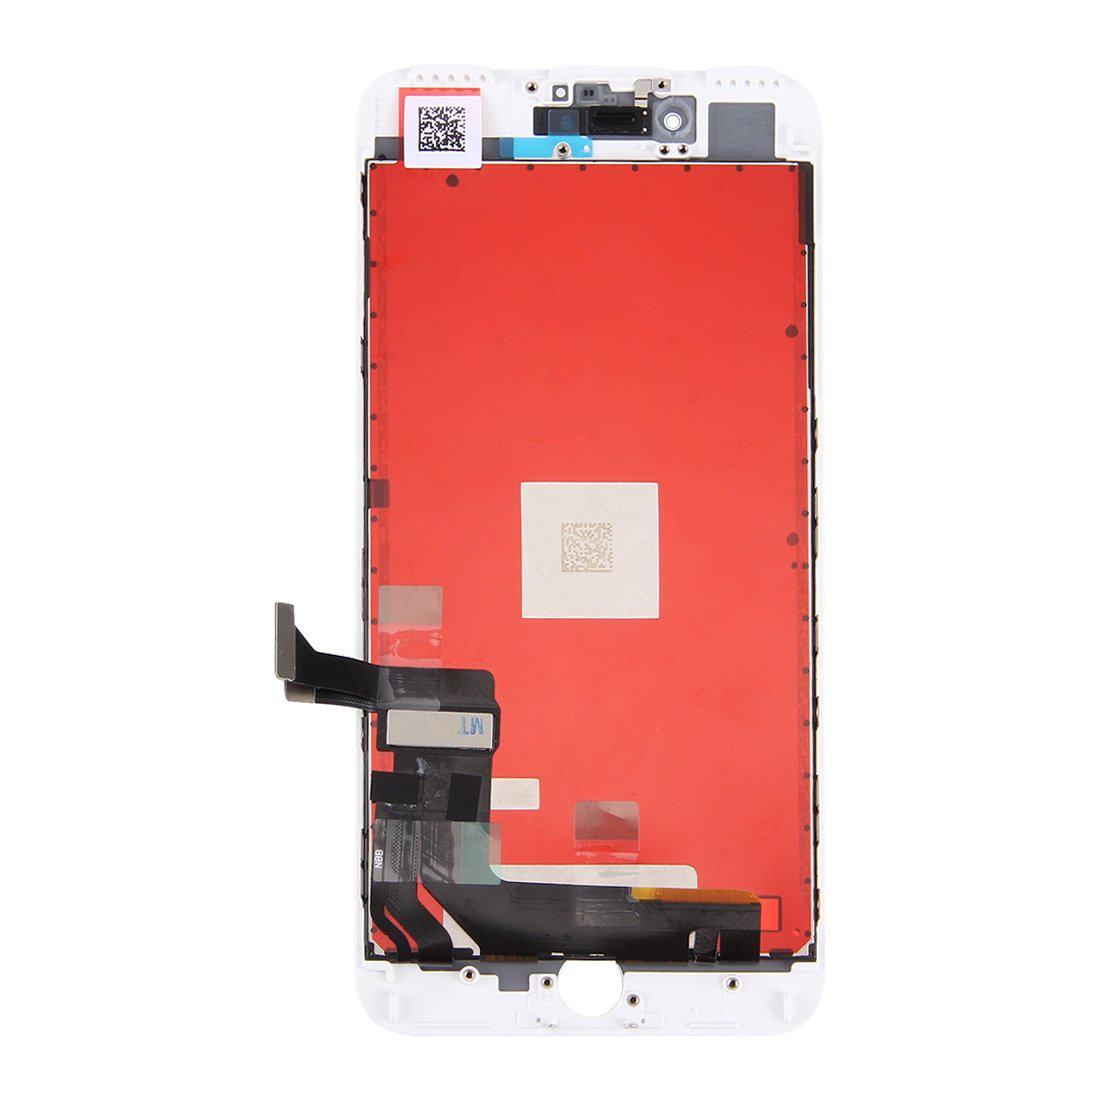 iPhone 7 Plus 5.5" Replacement LCD Touch Screen Assembly - White for [product_price] - First Help Tech